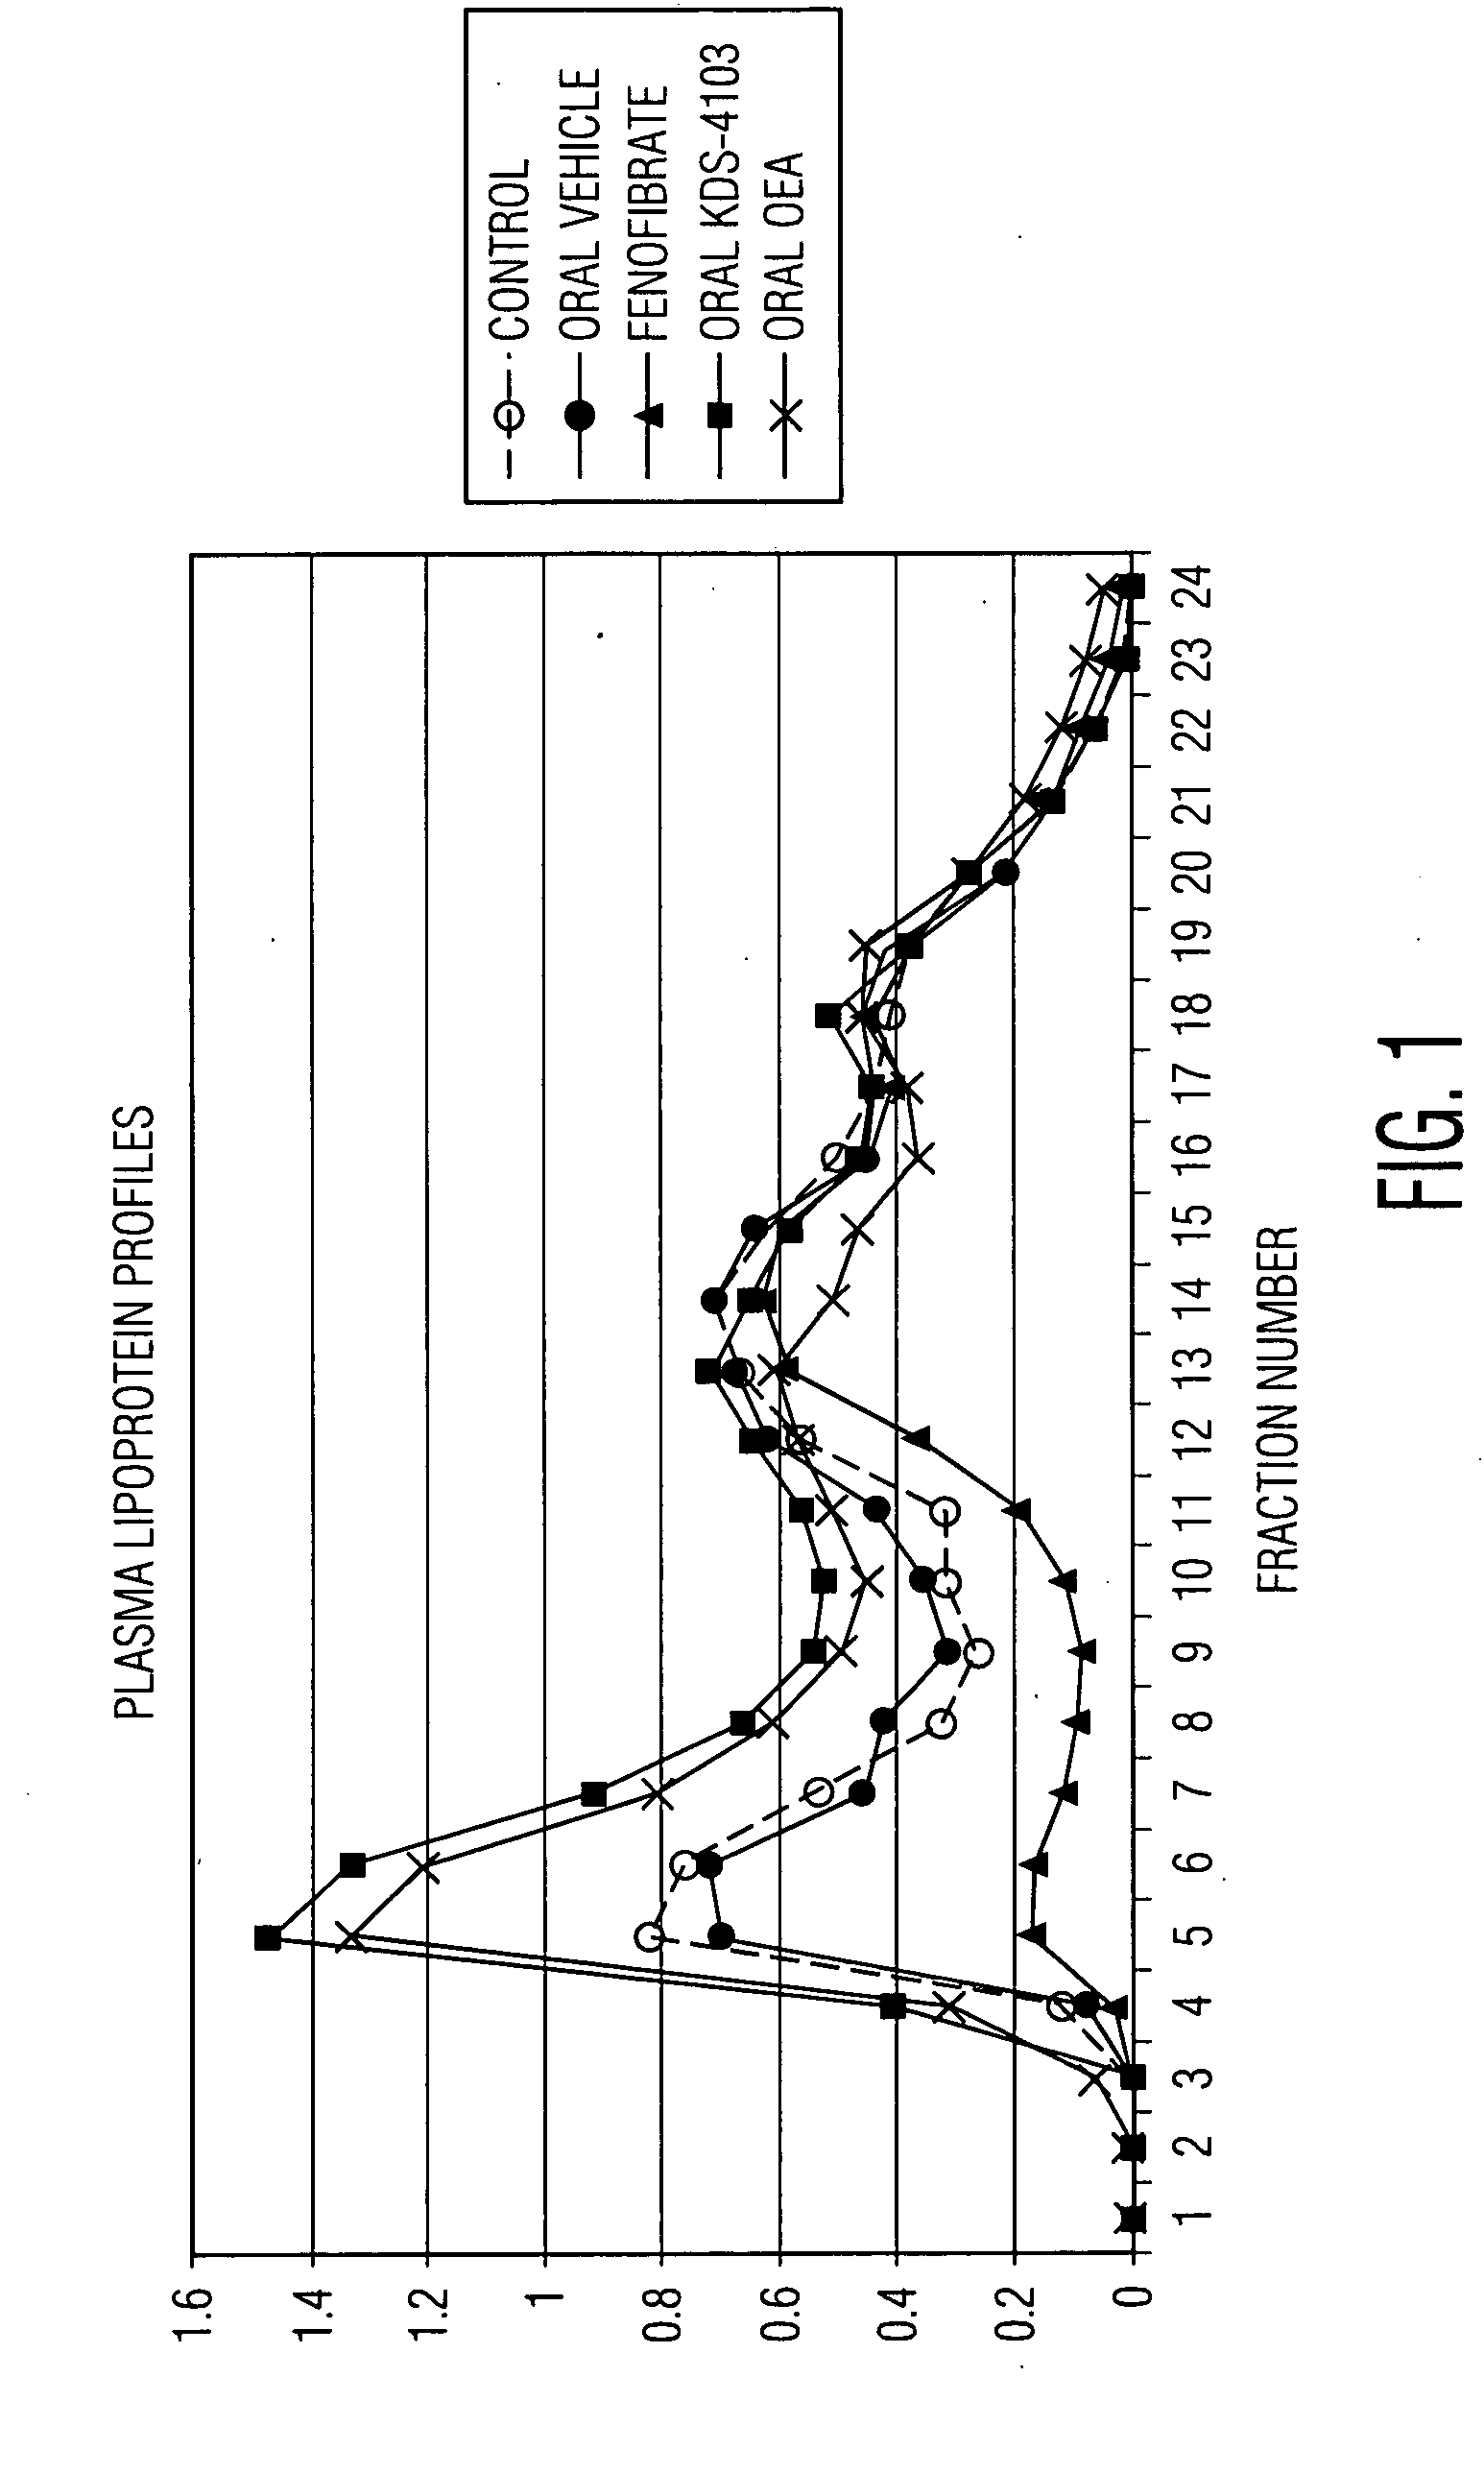 Methods for treating energy metabolism disorders by inhibiting fatty acid amide hydrolase activity